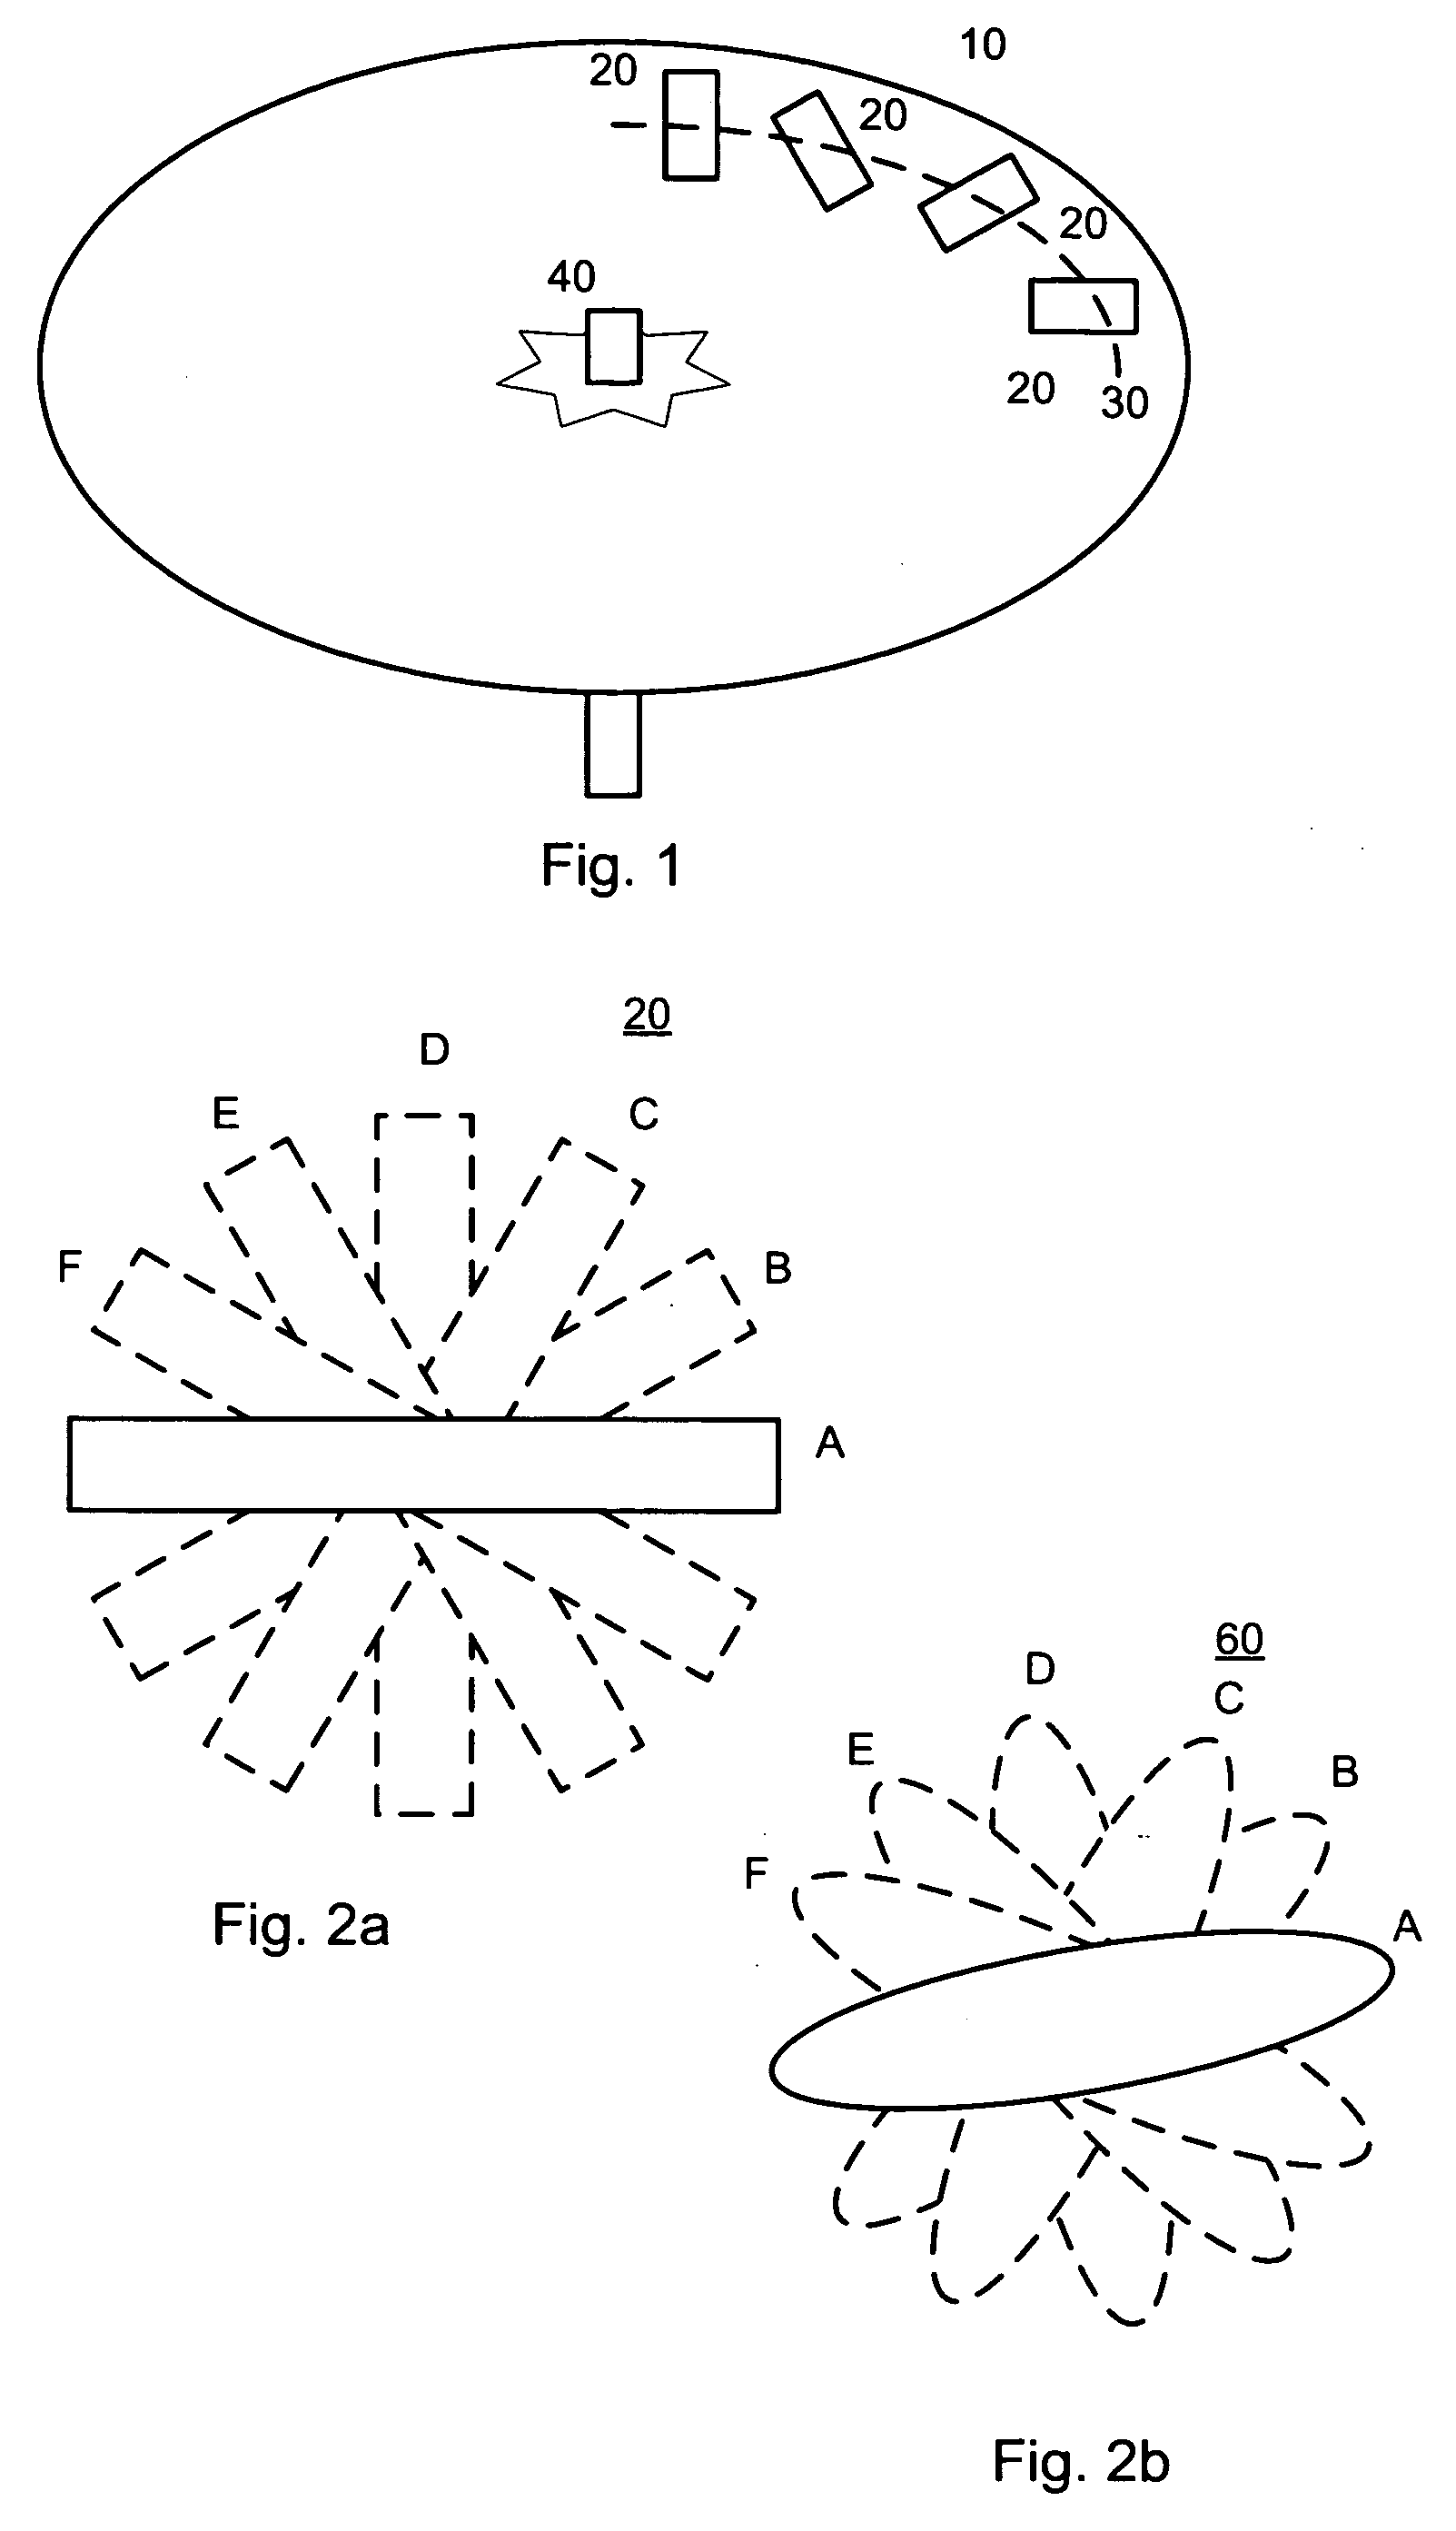 Method and system for encoding and detecting optical information